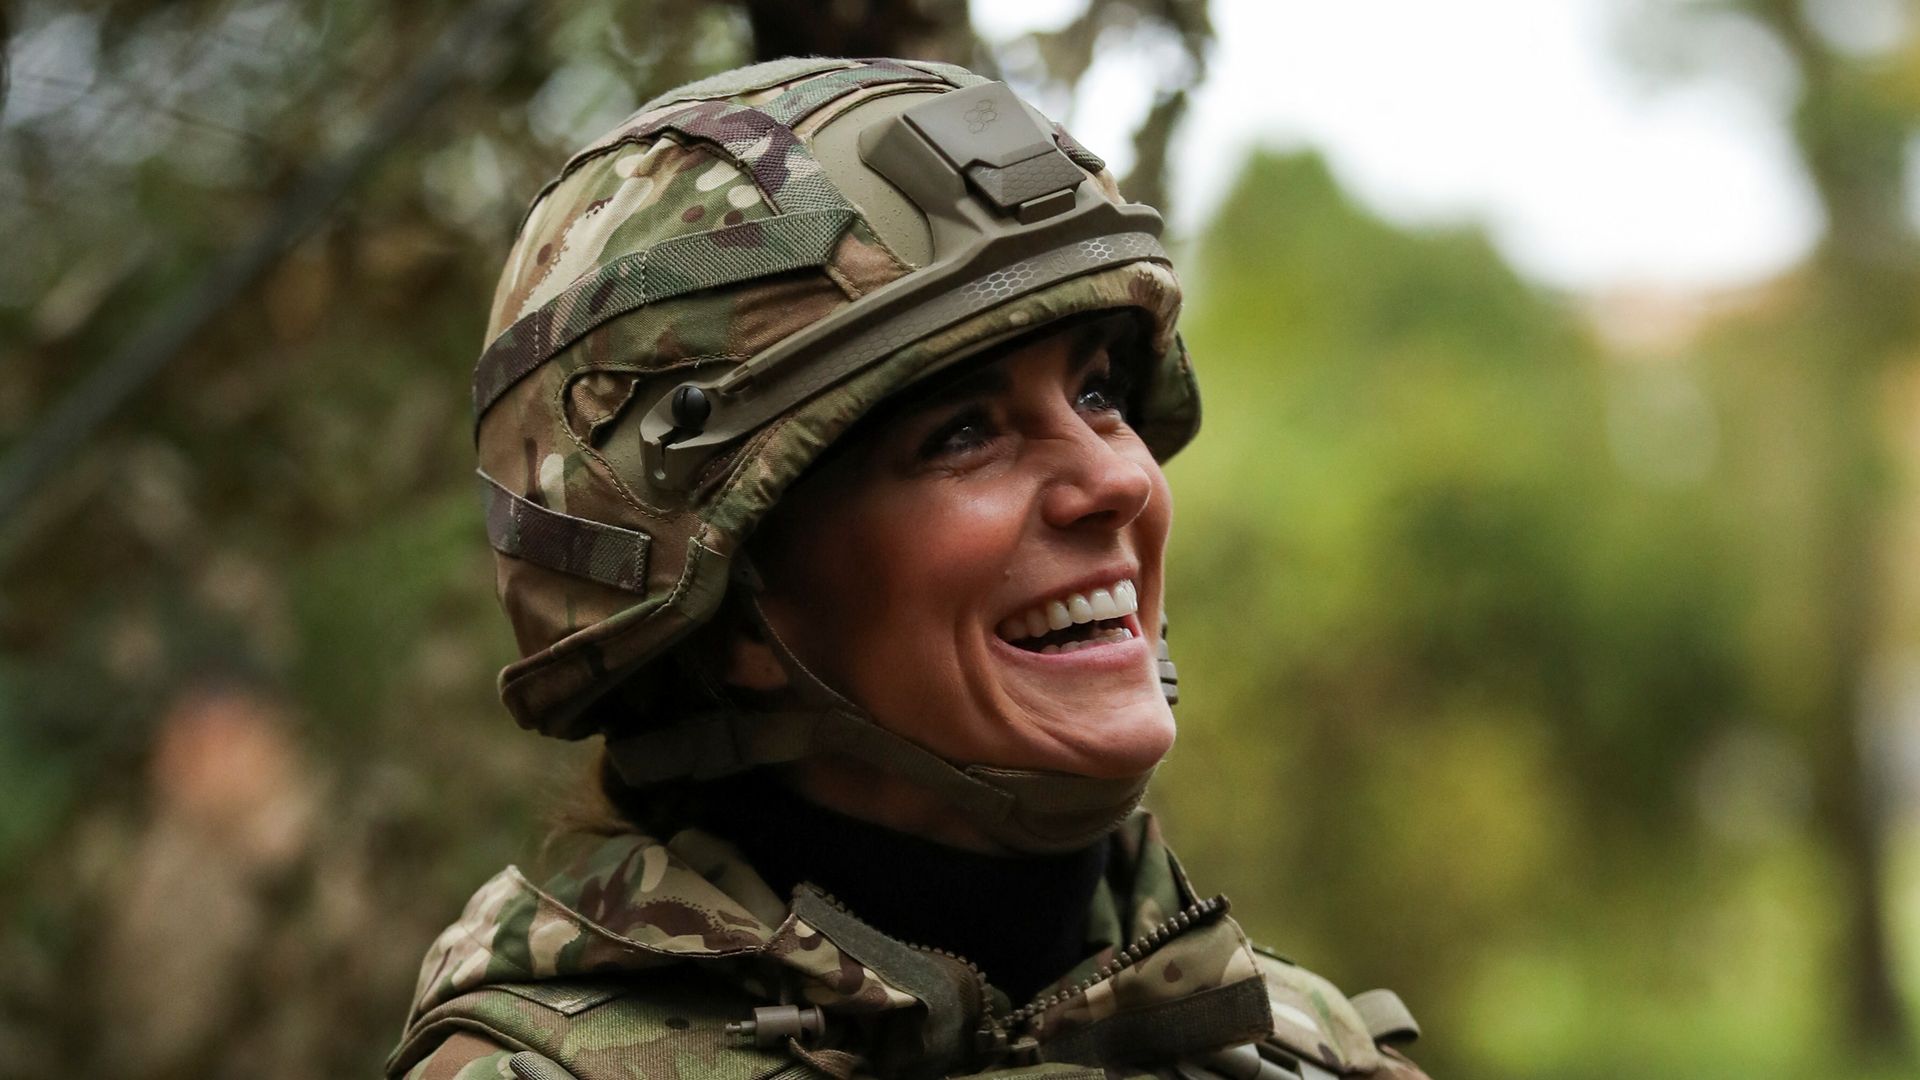 Kate Middleton wearing combat gear to visit The Queen's Dragoon Guards Regiment